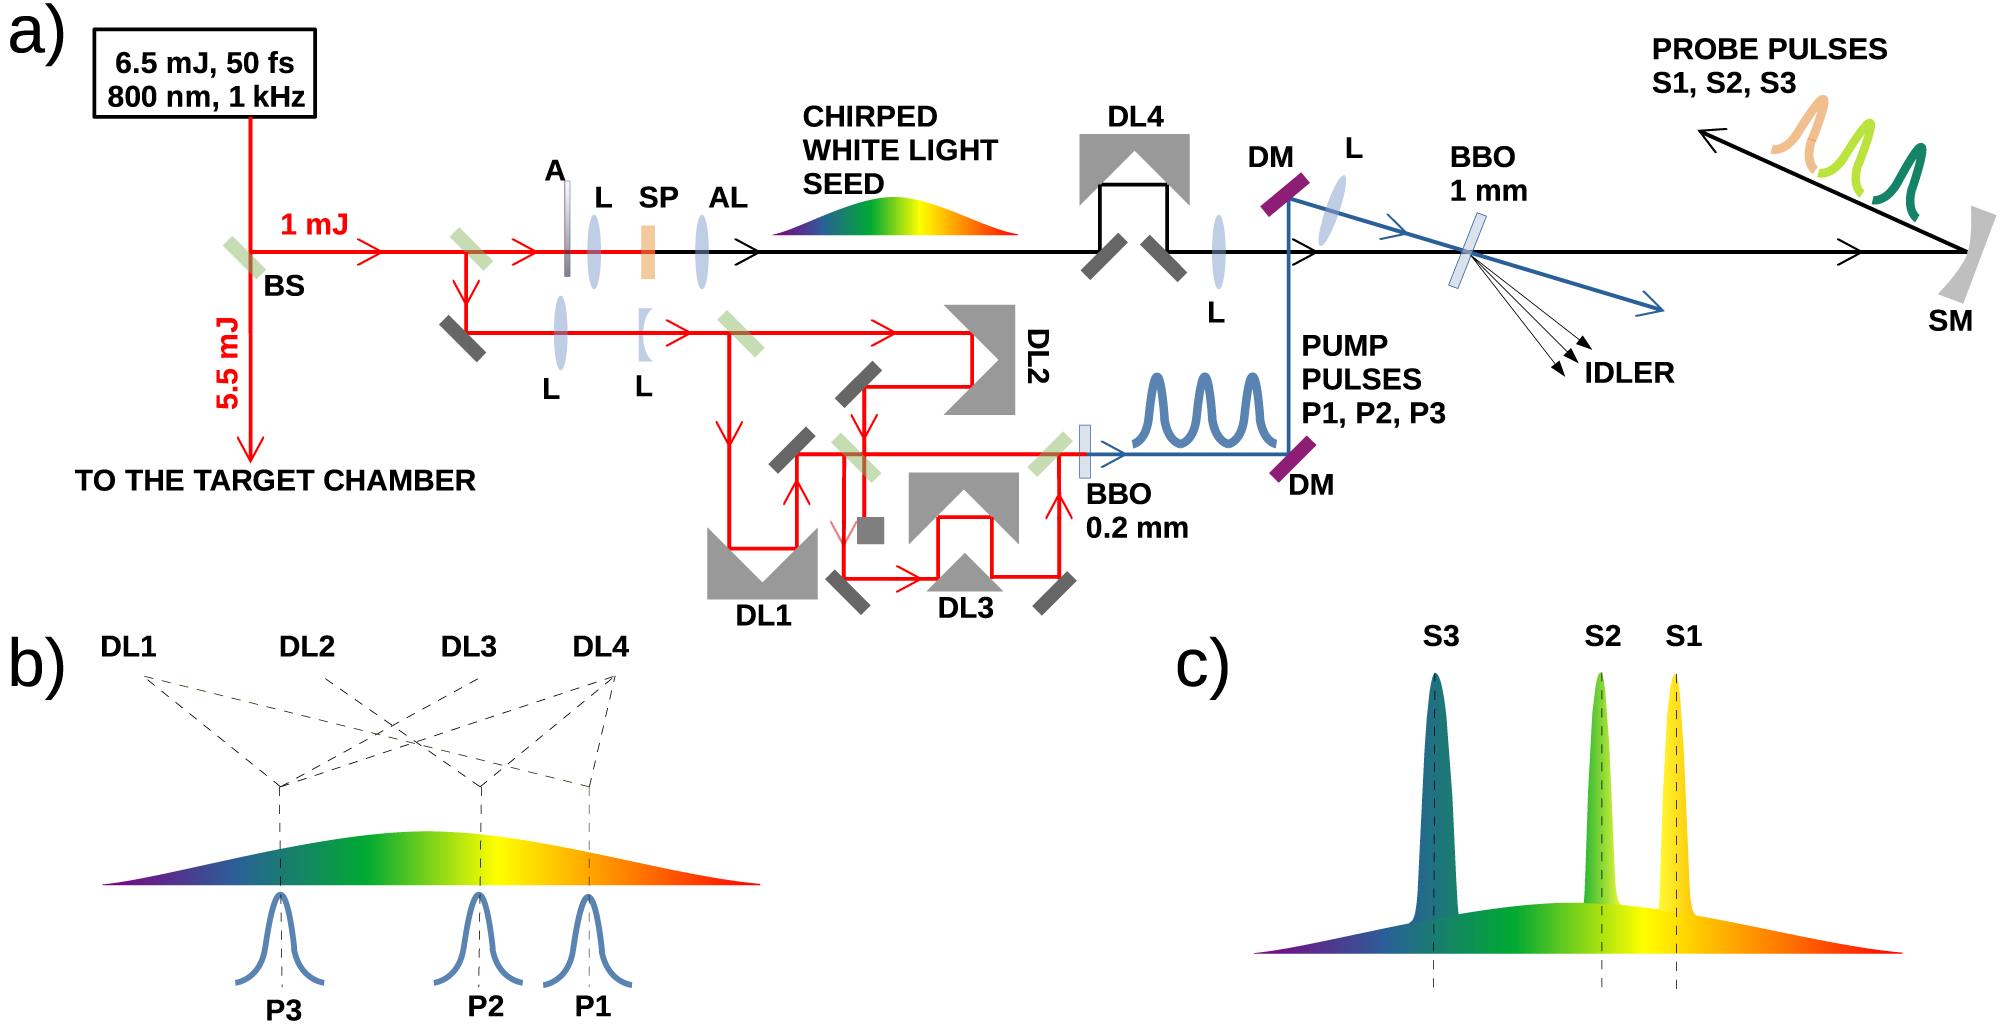 (a) Experimental scheme for generating three collinearly propagating time-delayed probe pulses, based on NOPA. BS, beamsplitter; L, lens; A, attenuator; AL, achromatic lens; SP, sapphire window; DL, delay line; DM, dichroic mirror; SM, spherical mirror. (b) Schematic representation of the temporal overlap of the WLC with the pump pulses in a single-stage BBO: the description schematically shows which pump pulses are controlled by specific delay lines. P1–P3, pump pulses. (c) WLC after narrowband amplification. S1–S3, probe pulses.